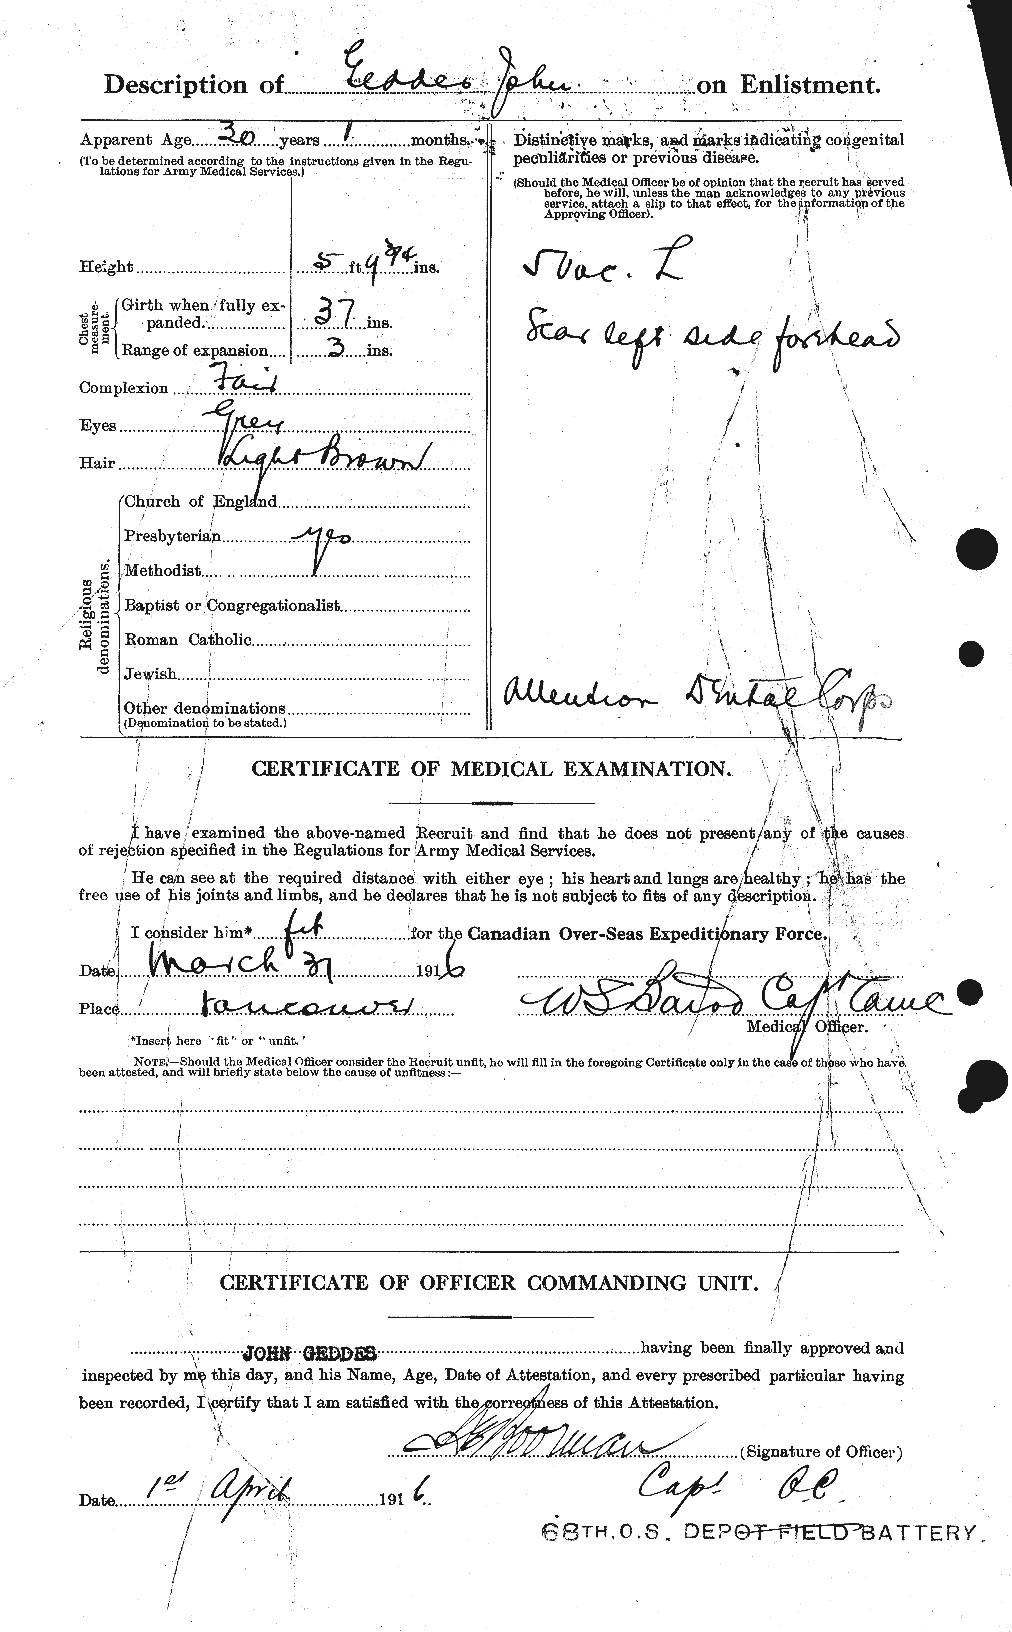 Personnel Records of the First World War - CEF 346284b